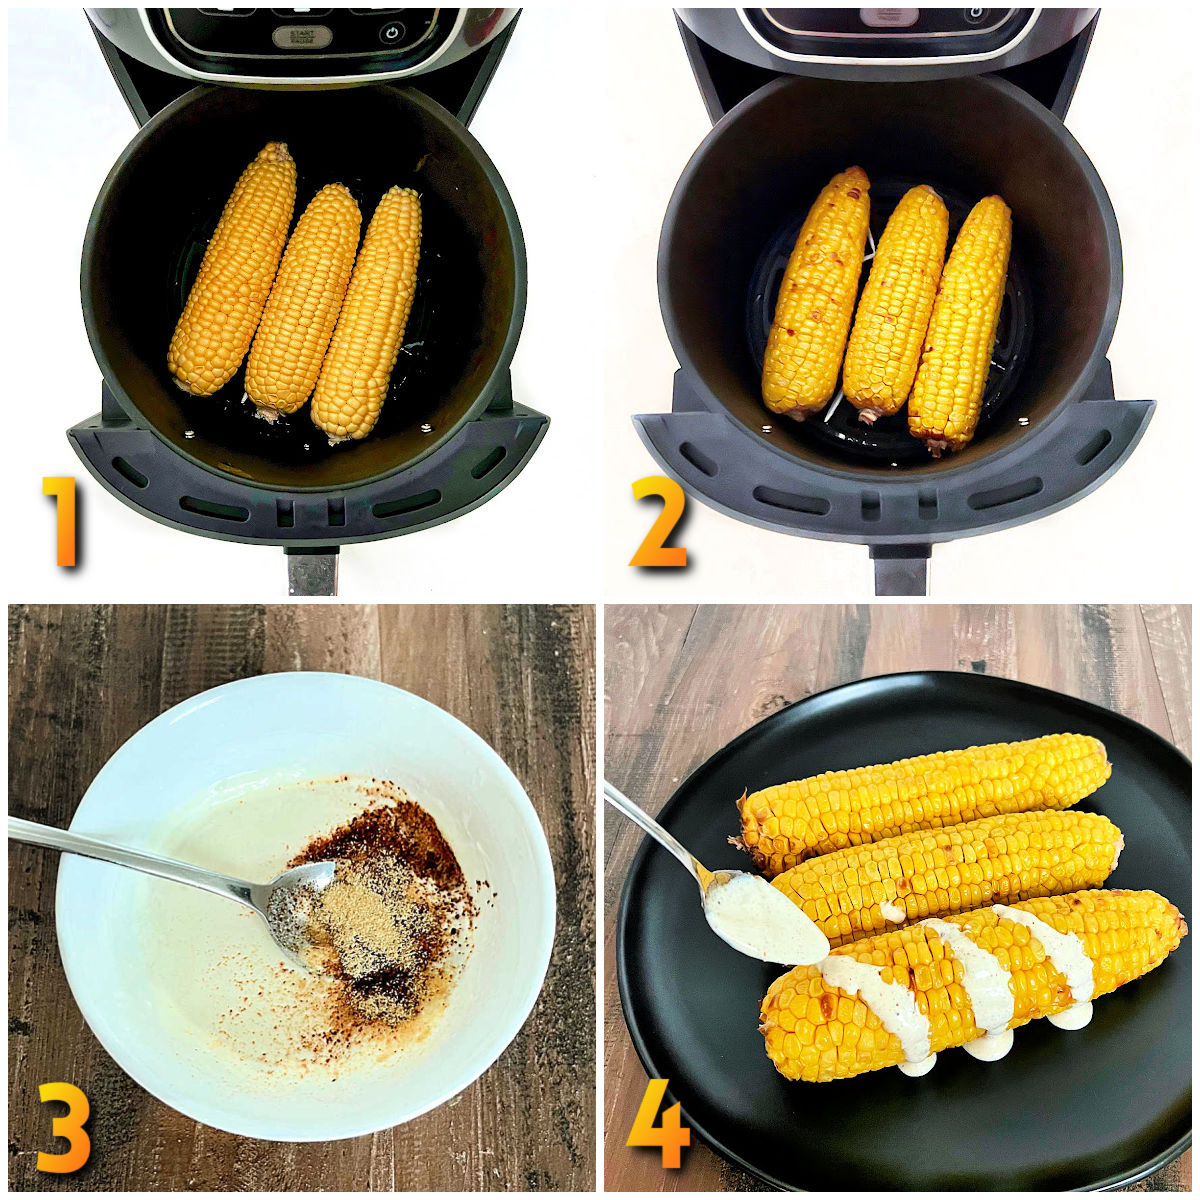 Steps 1-4 how to make air fryer corn on the cob.
